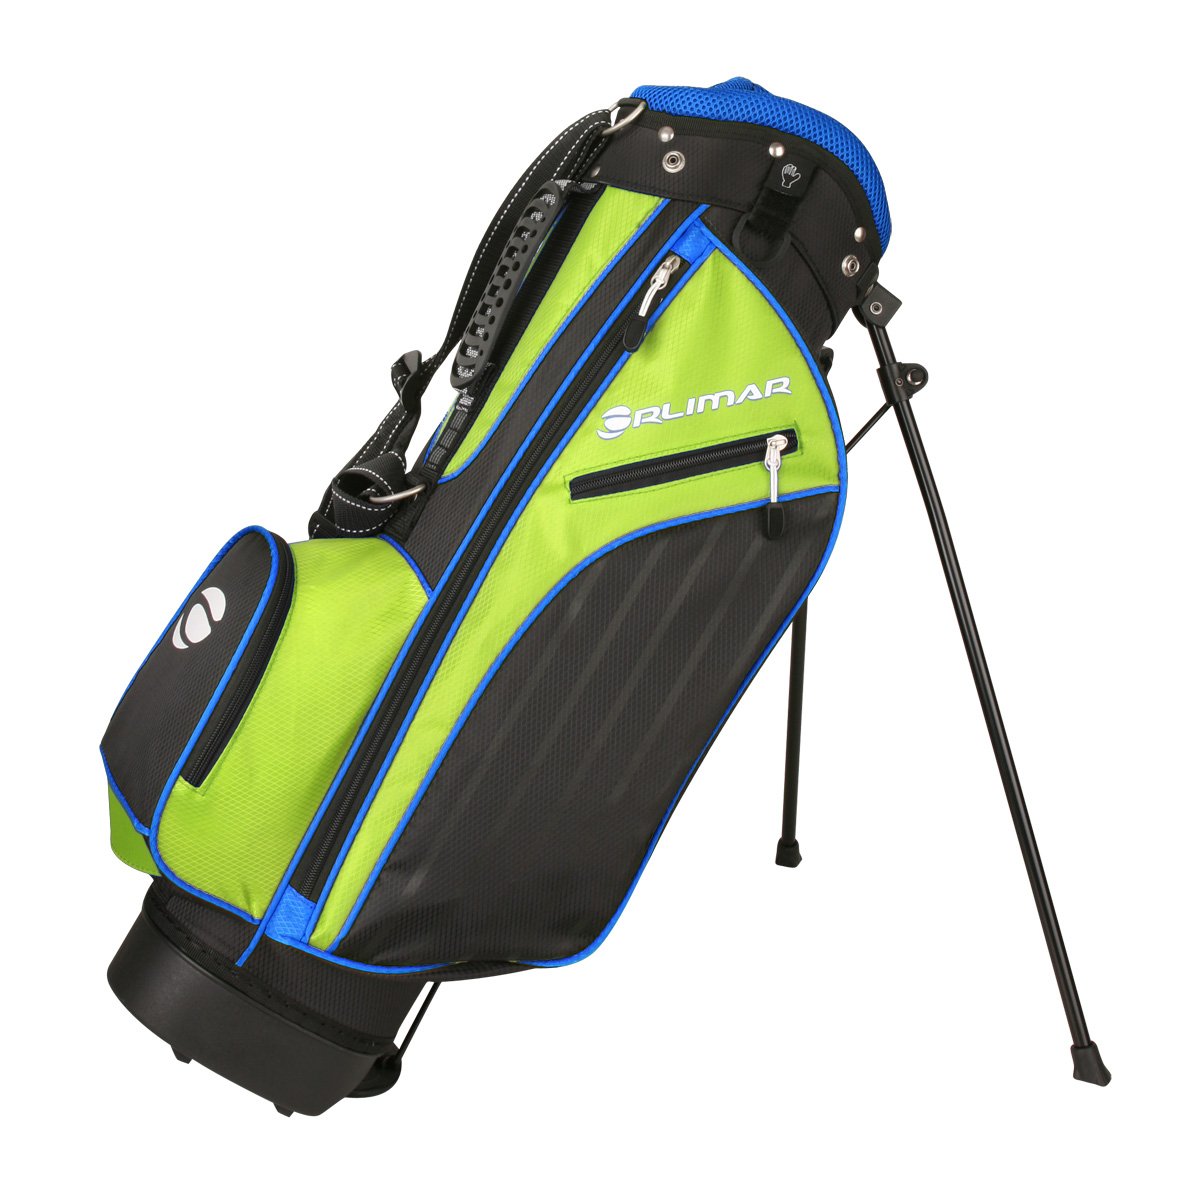 Orlimar Golf ATS Junior Boy's Golf Club Sets with Stand Bag | for Kids Ages 12 and Under, Right and Left Hand